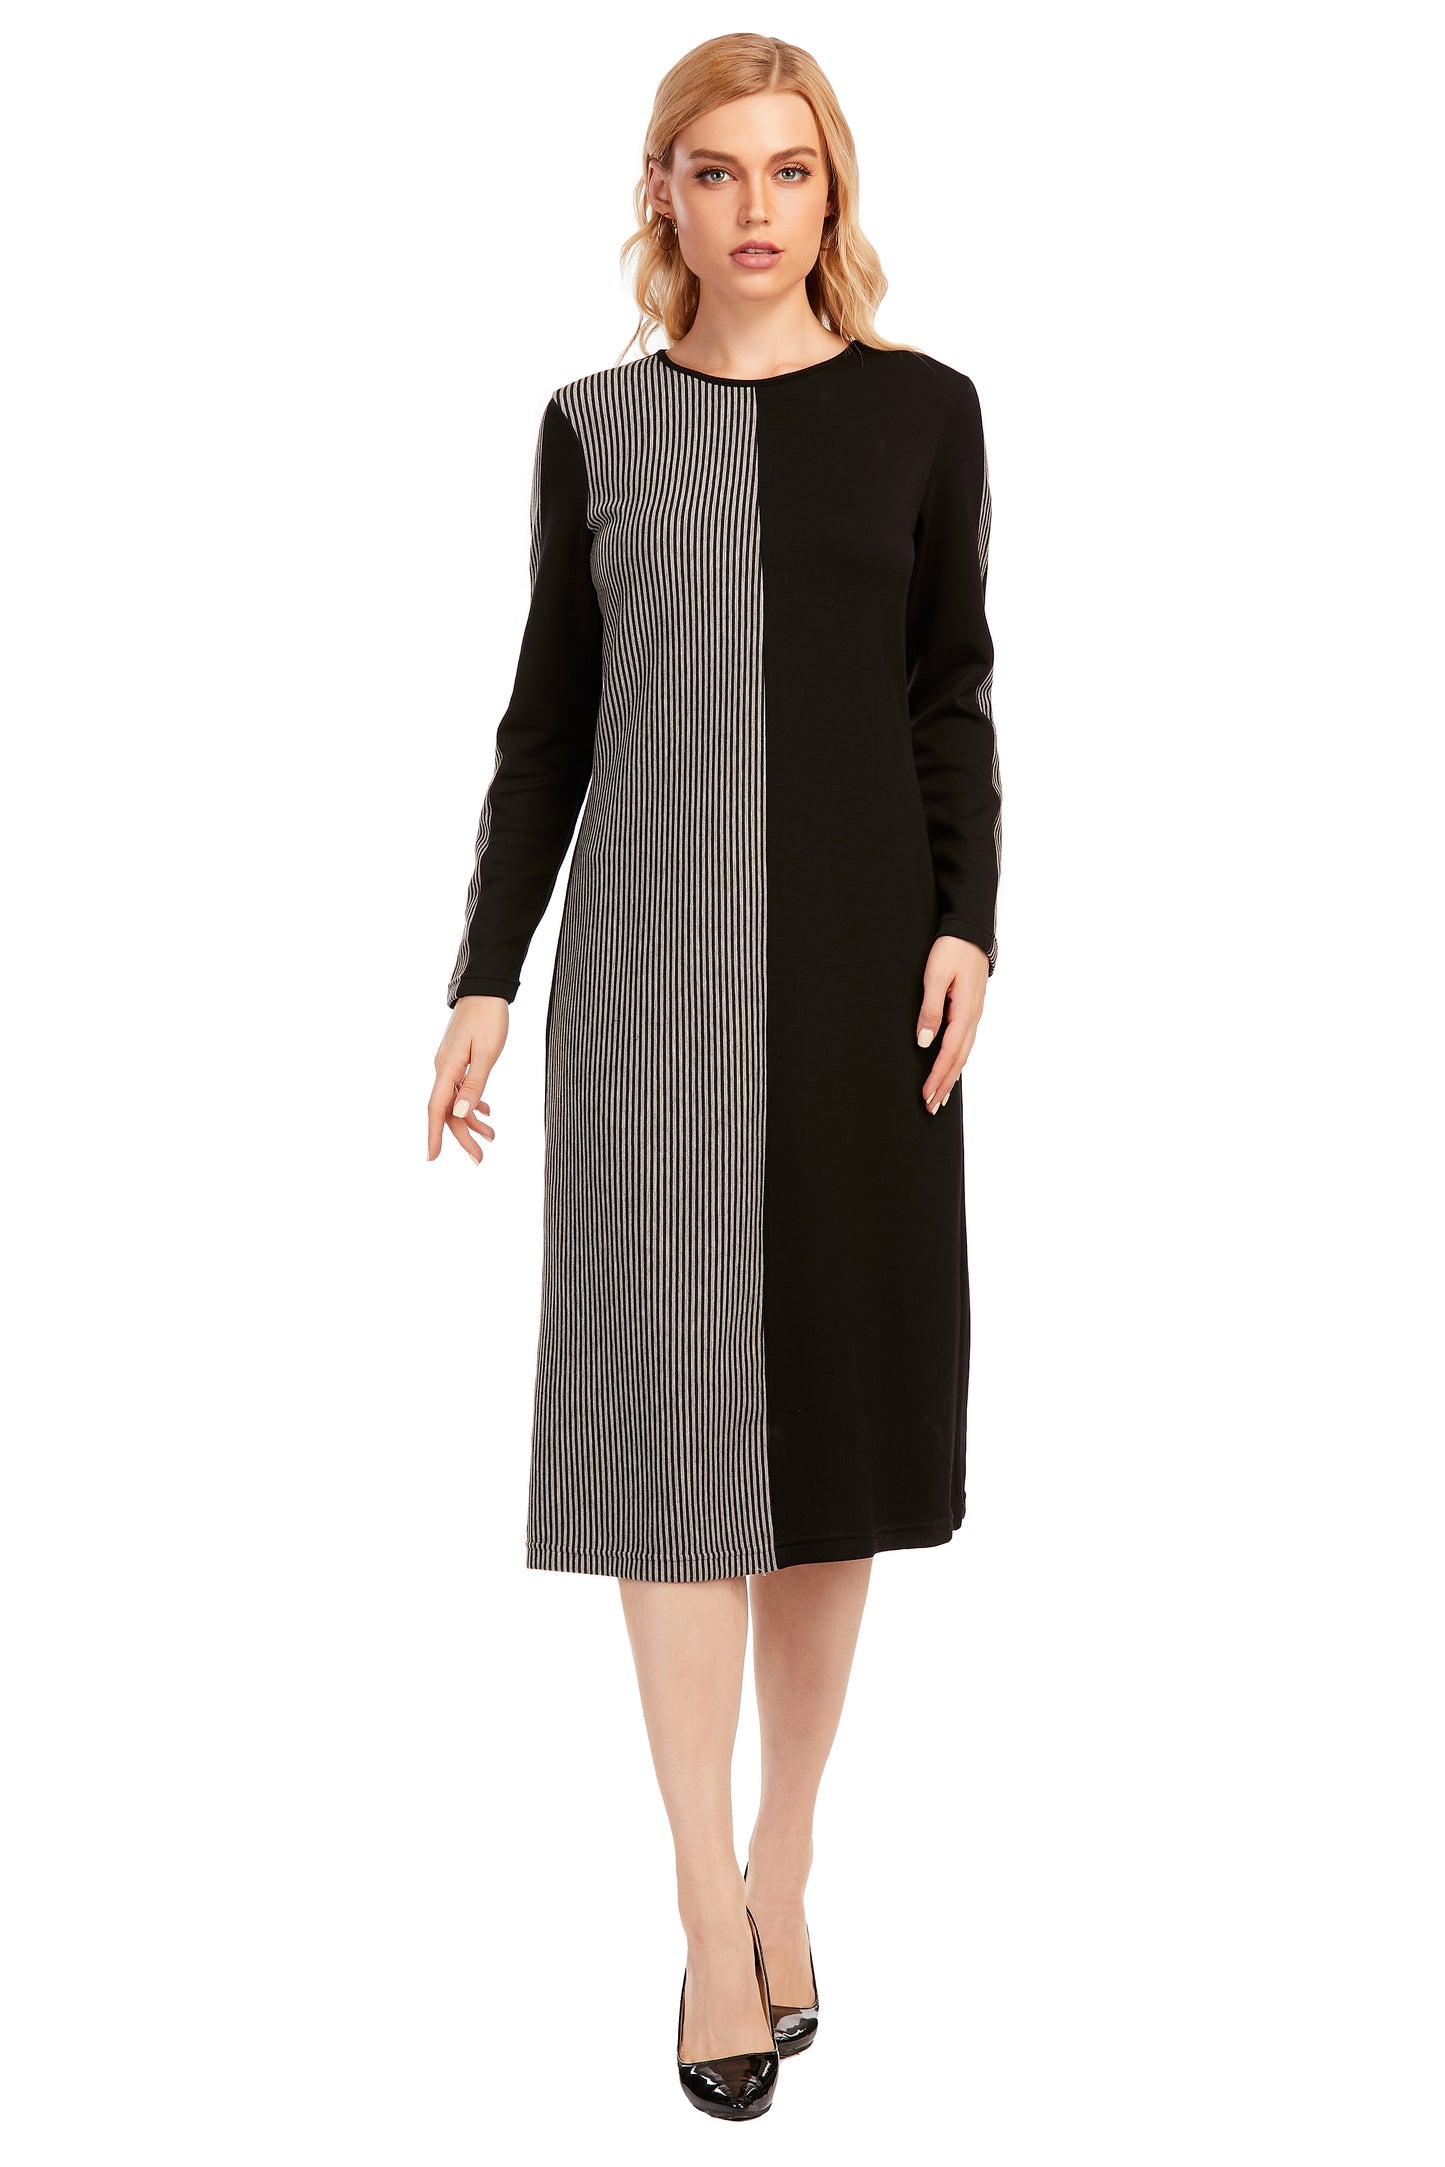 Striped & Solid Modest Knitted Long Sleeve Dress - alamaud